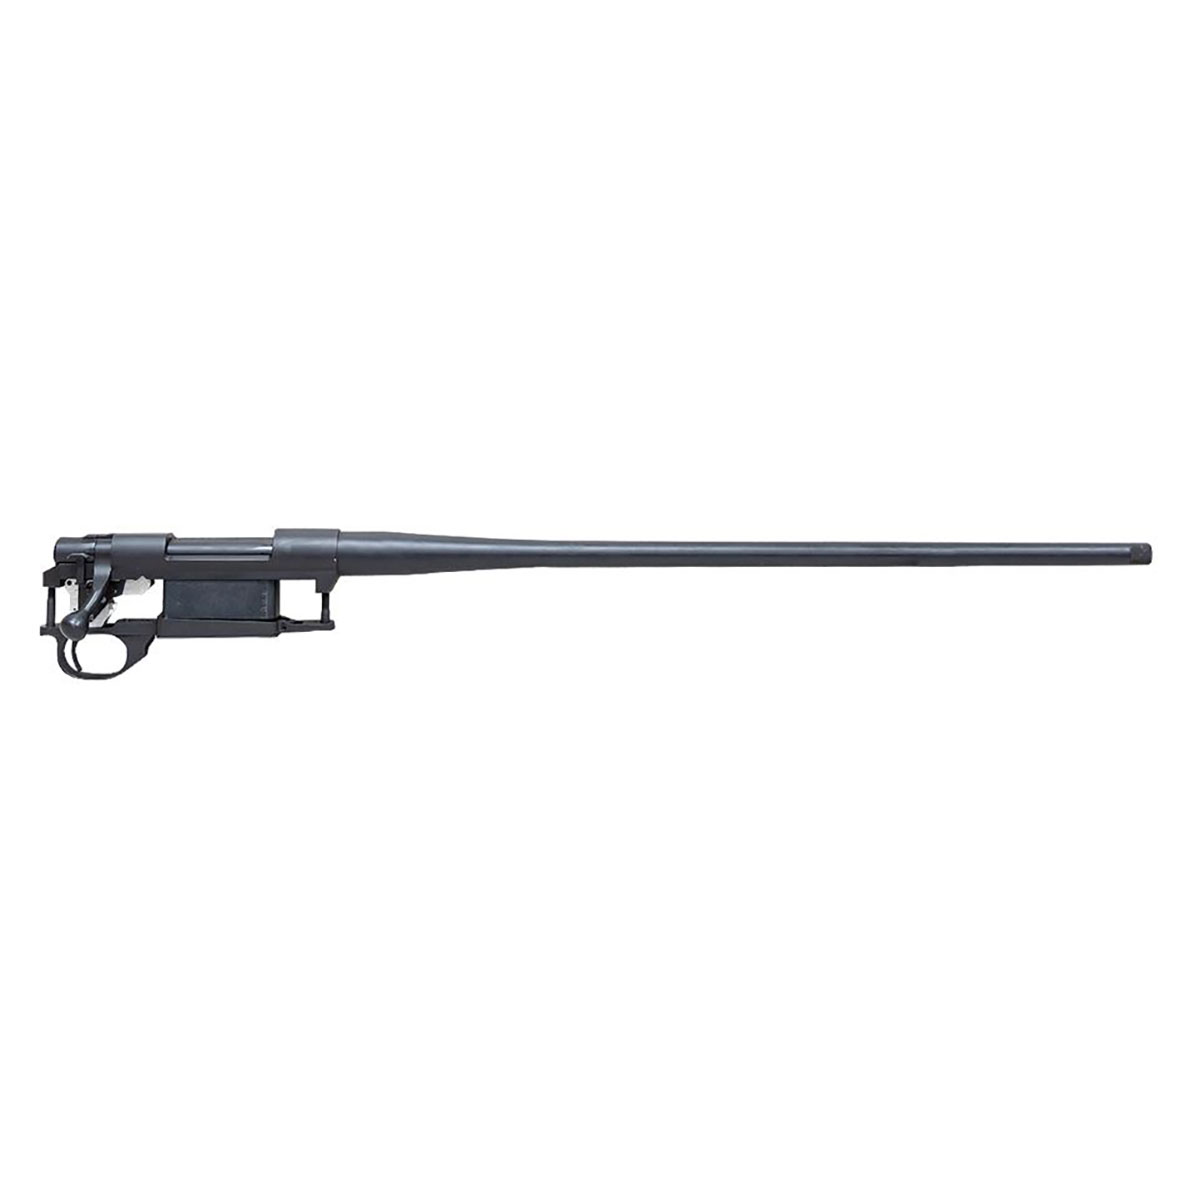 HOWA - M1500 BARRELED RECEIVER .243 WINCHESTER THREADED